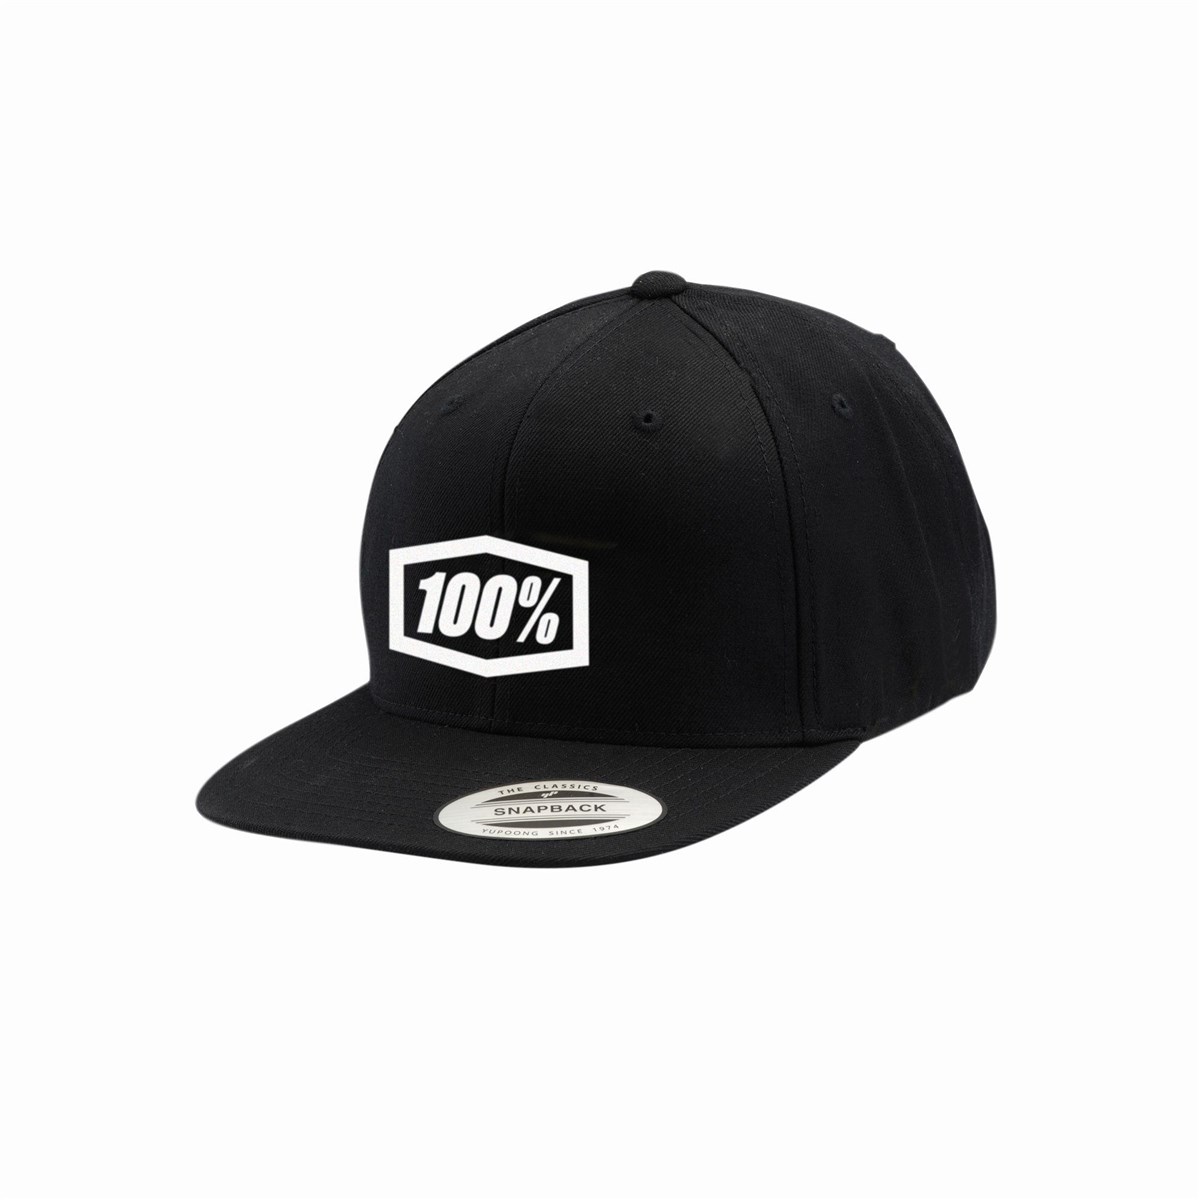 100% Classic Youth Snpback Hat product image